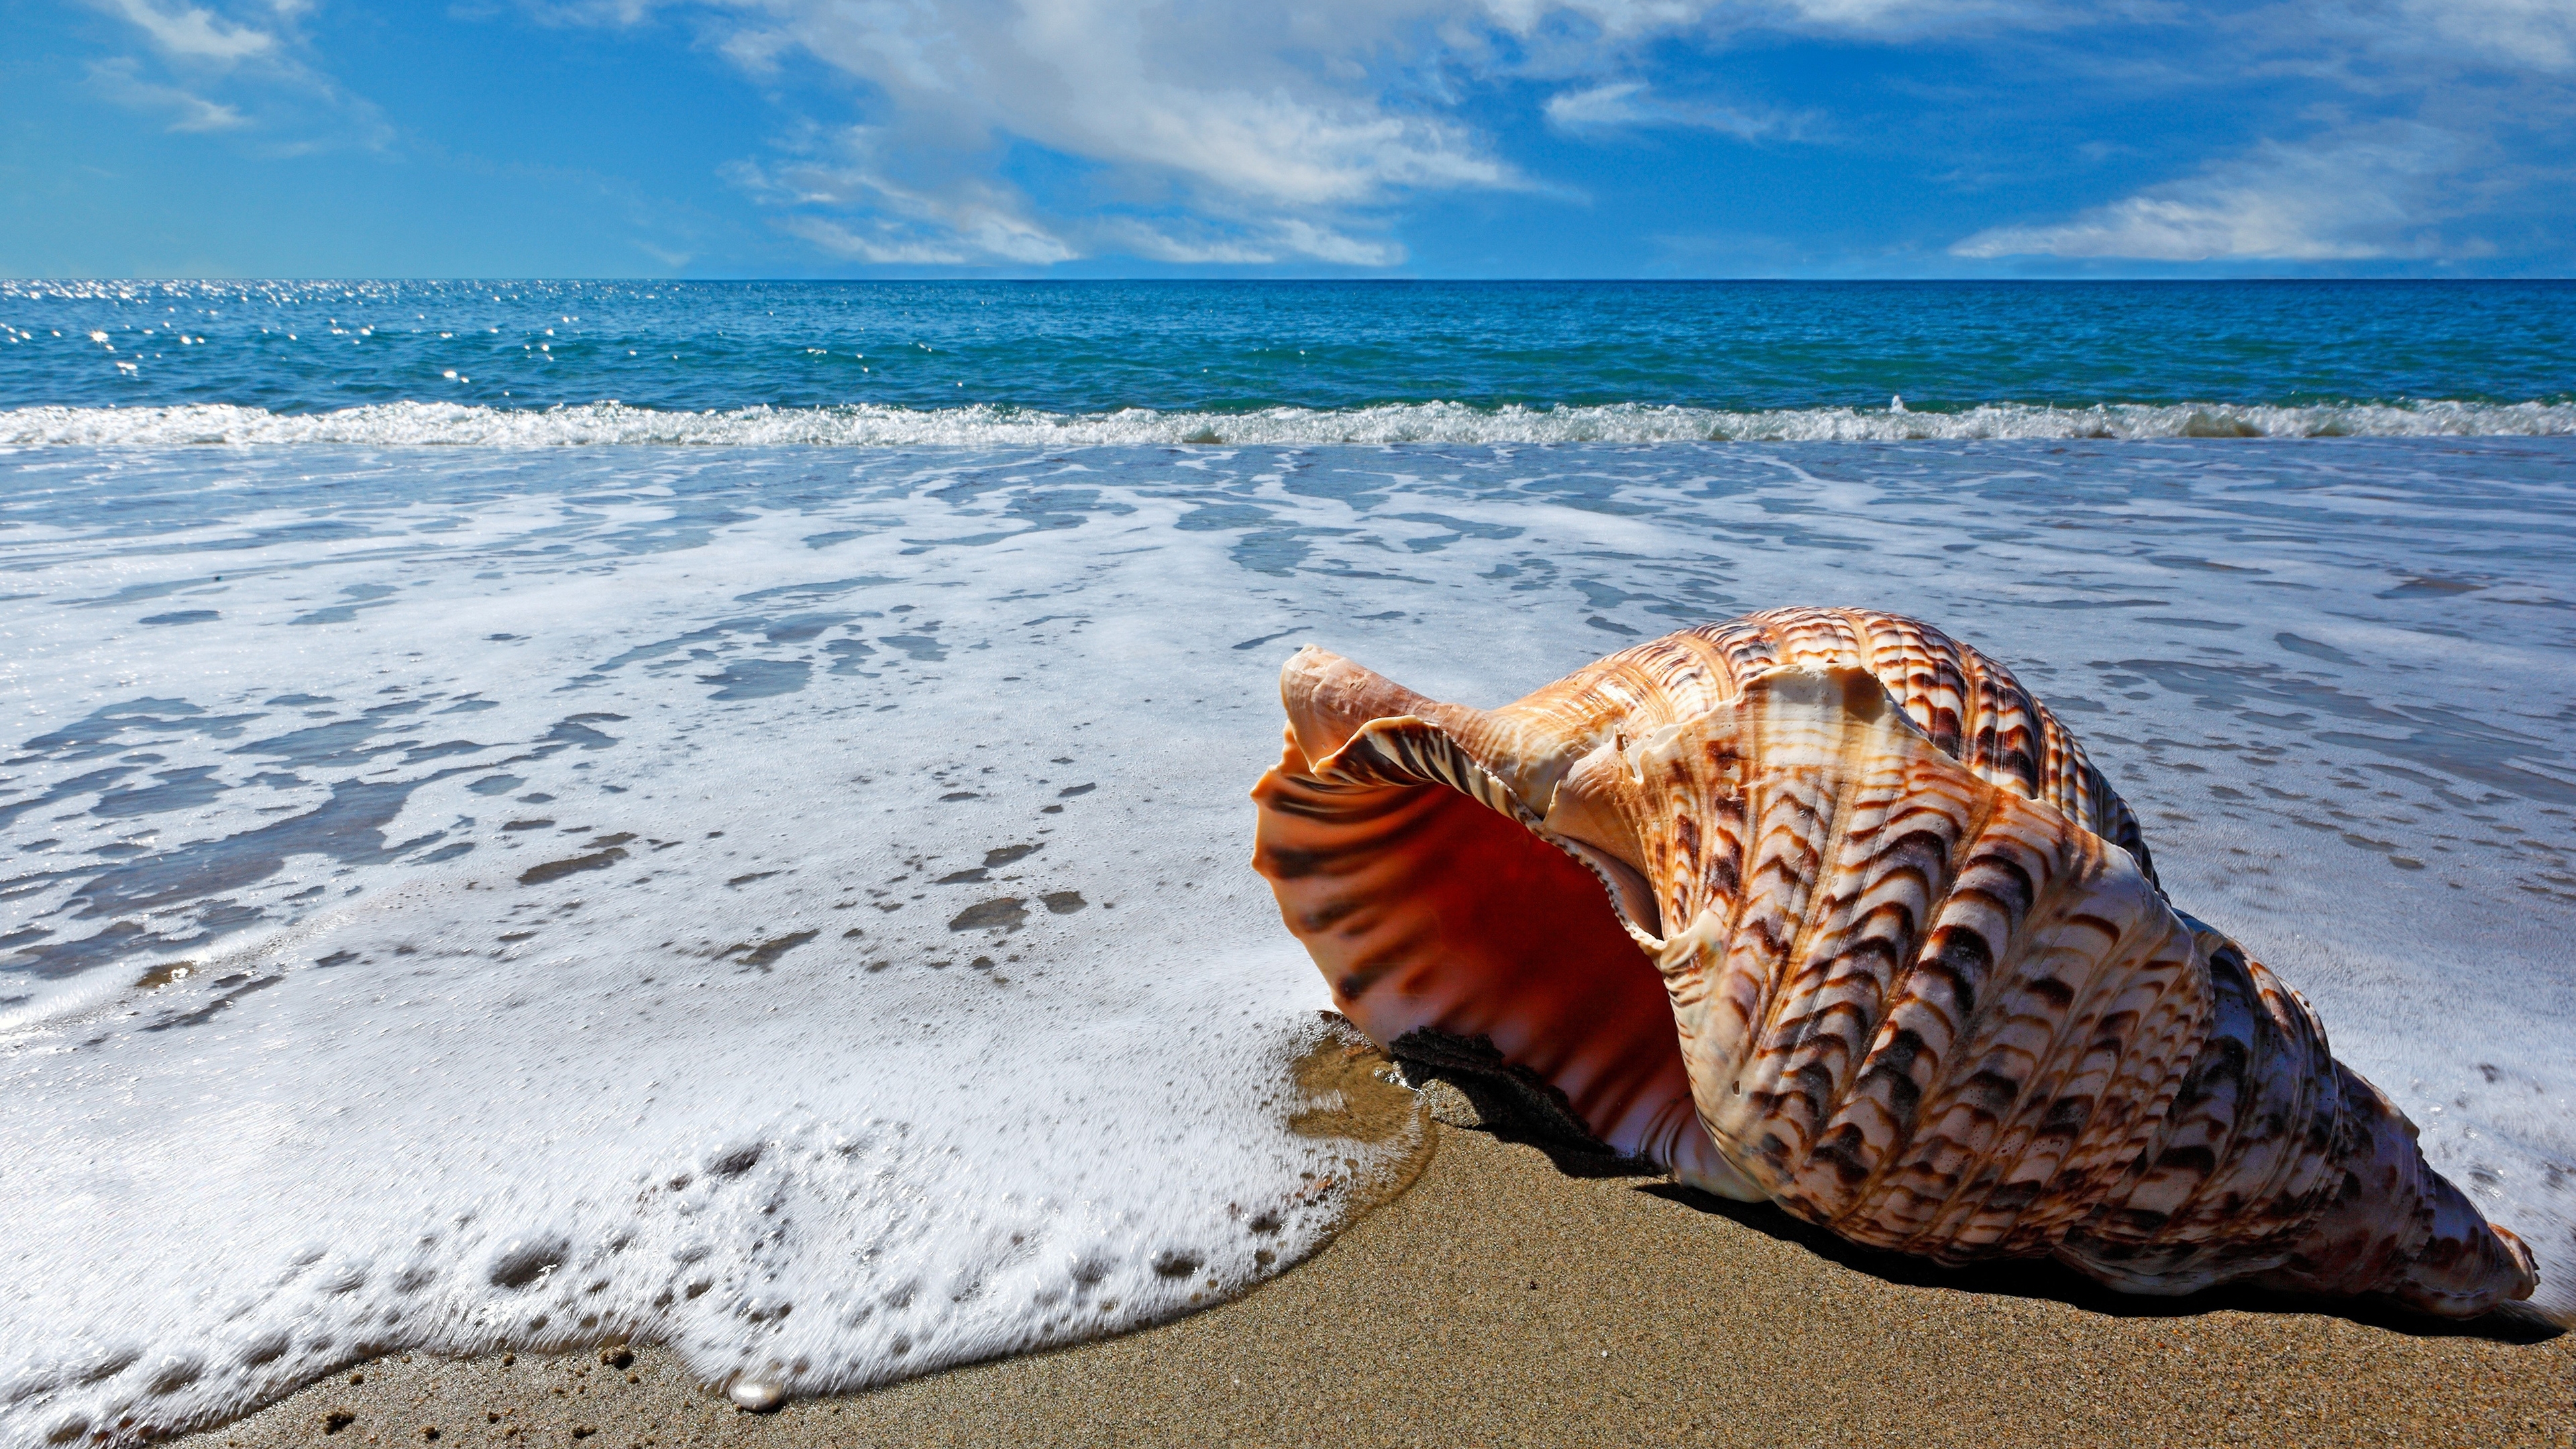 Sea Shell for 3840 x 2160 Ultra HD resolution